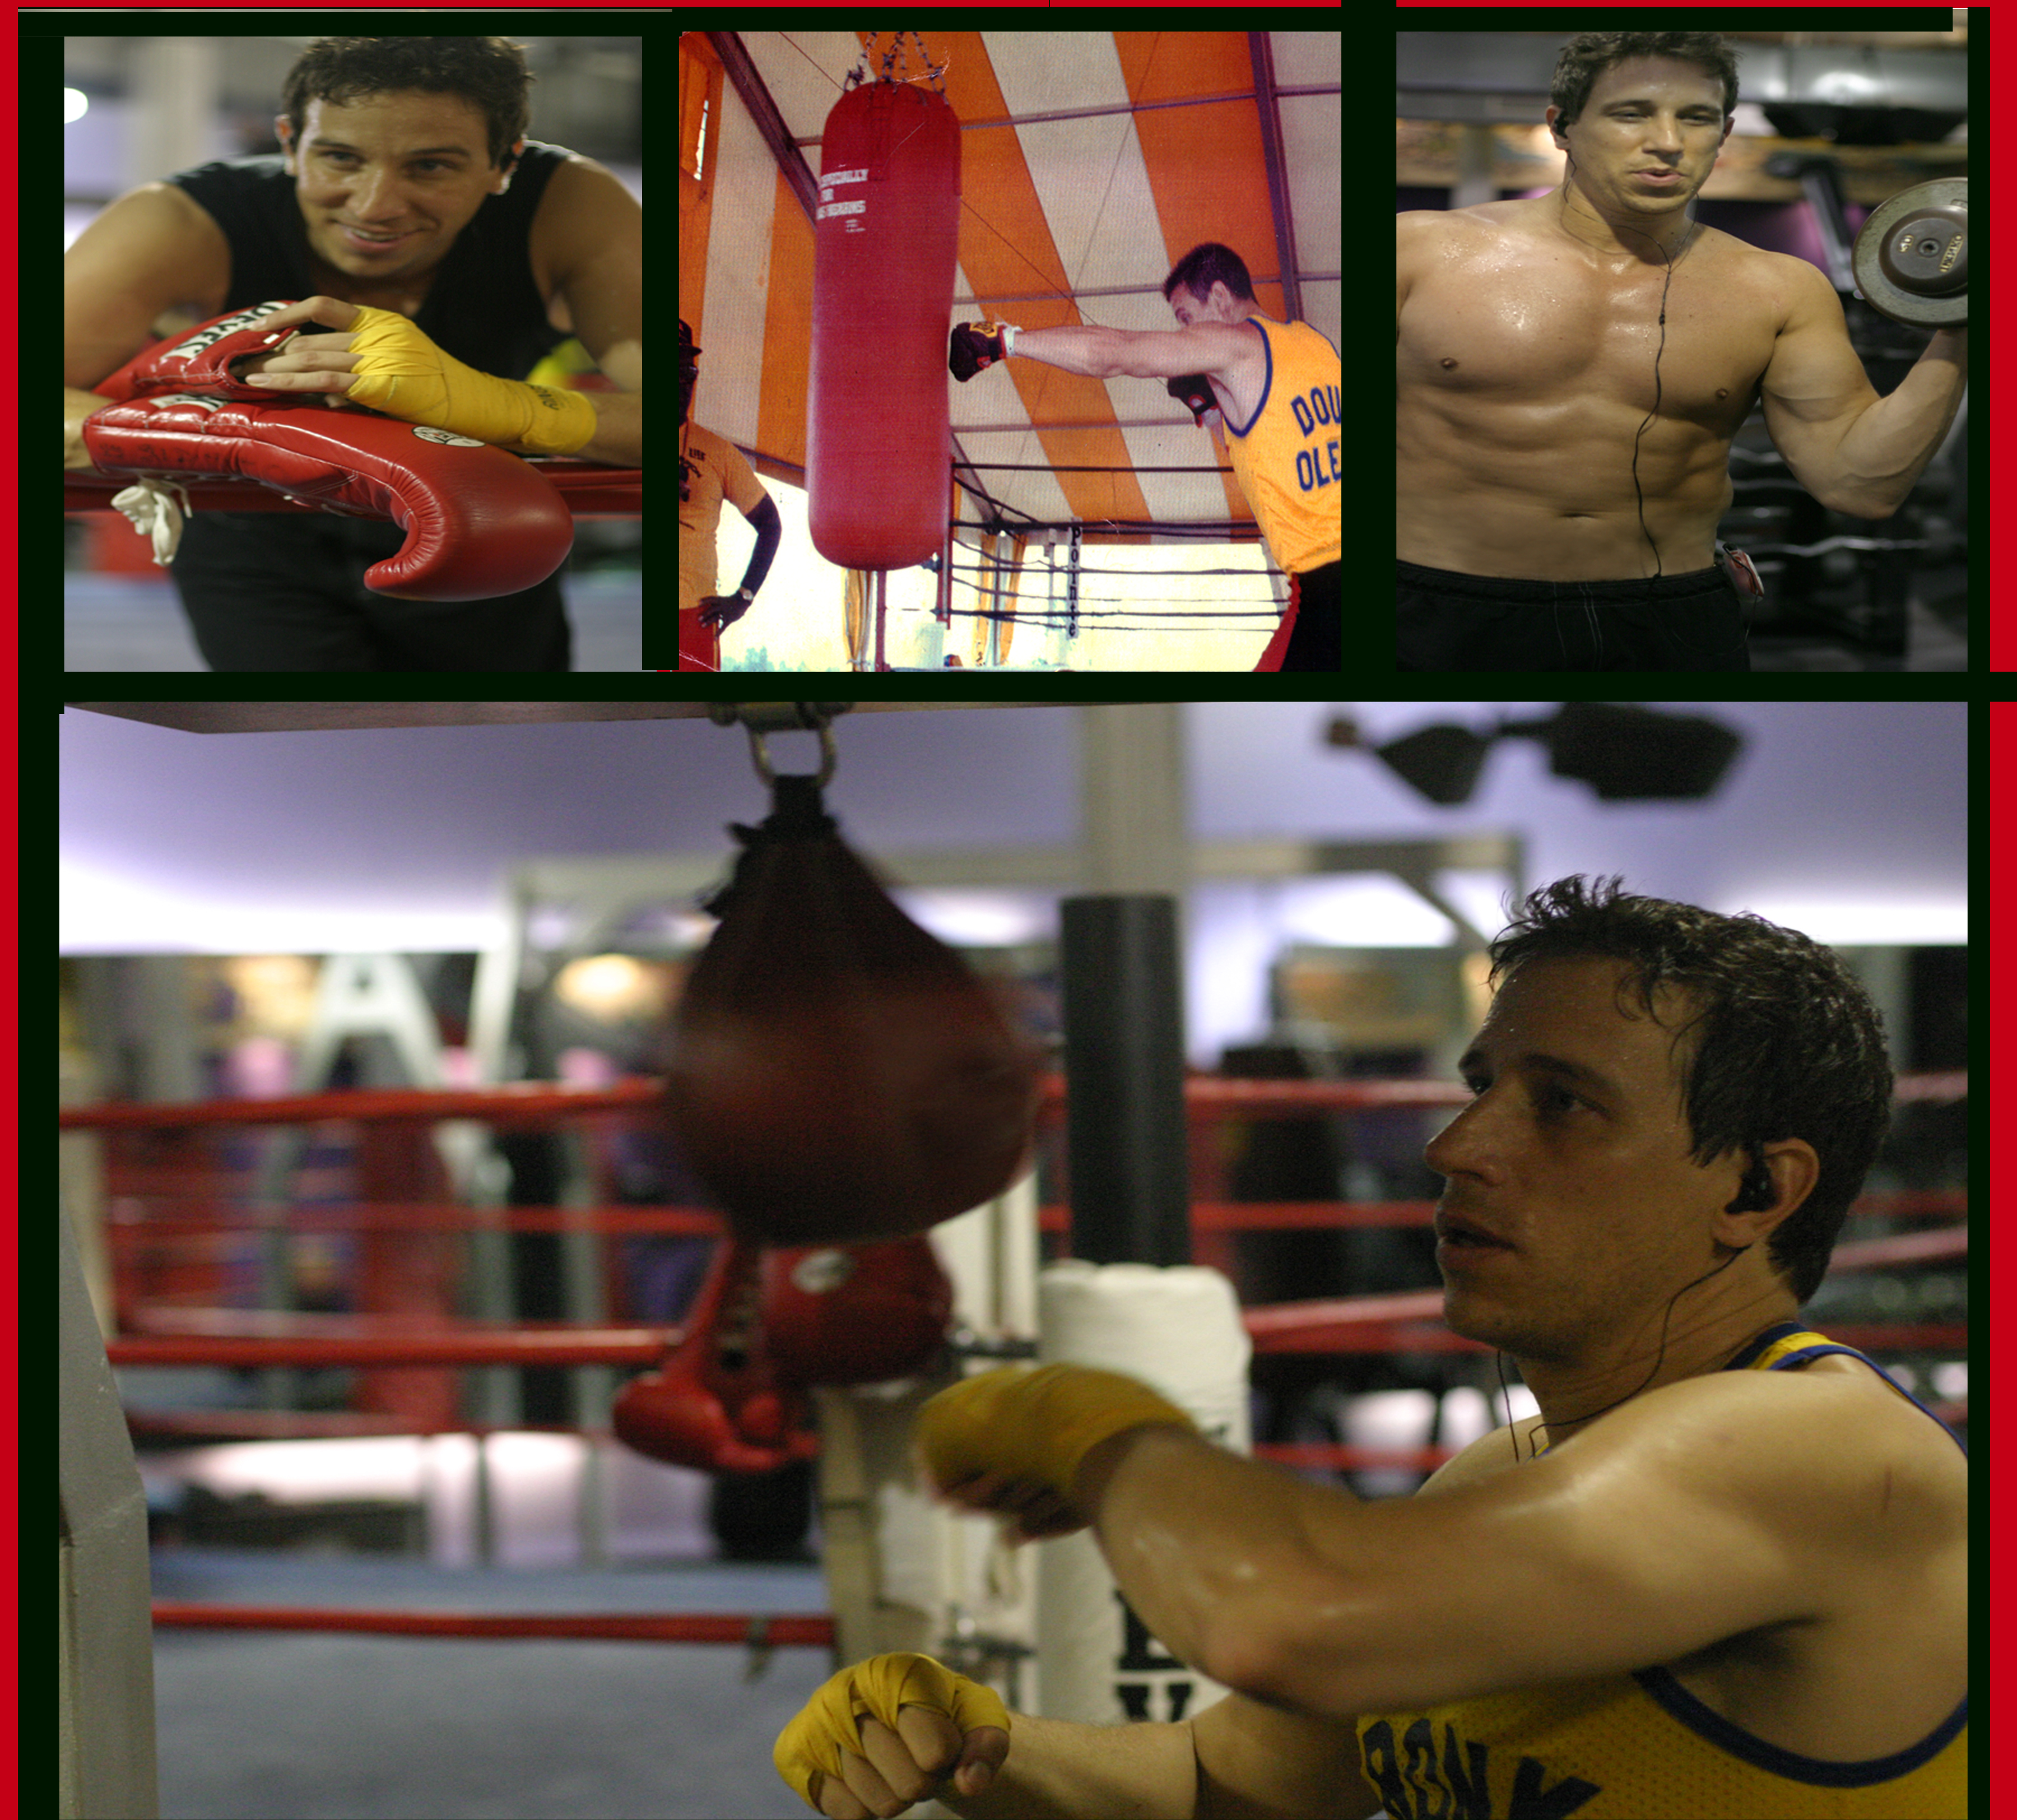 Doug Olear, former Golden Gloves Boxing Champion and member of the Kronk Boxing Team.